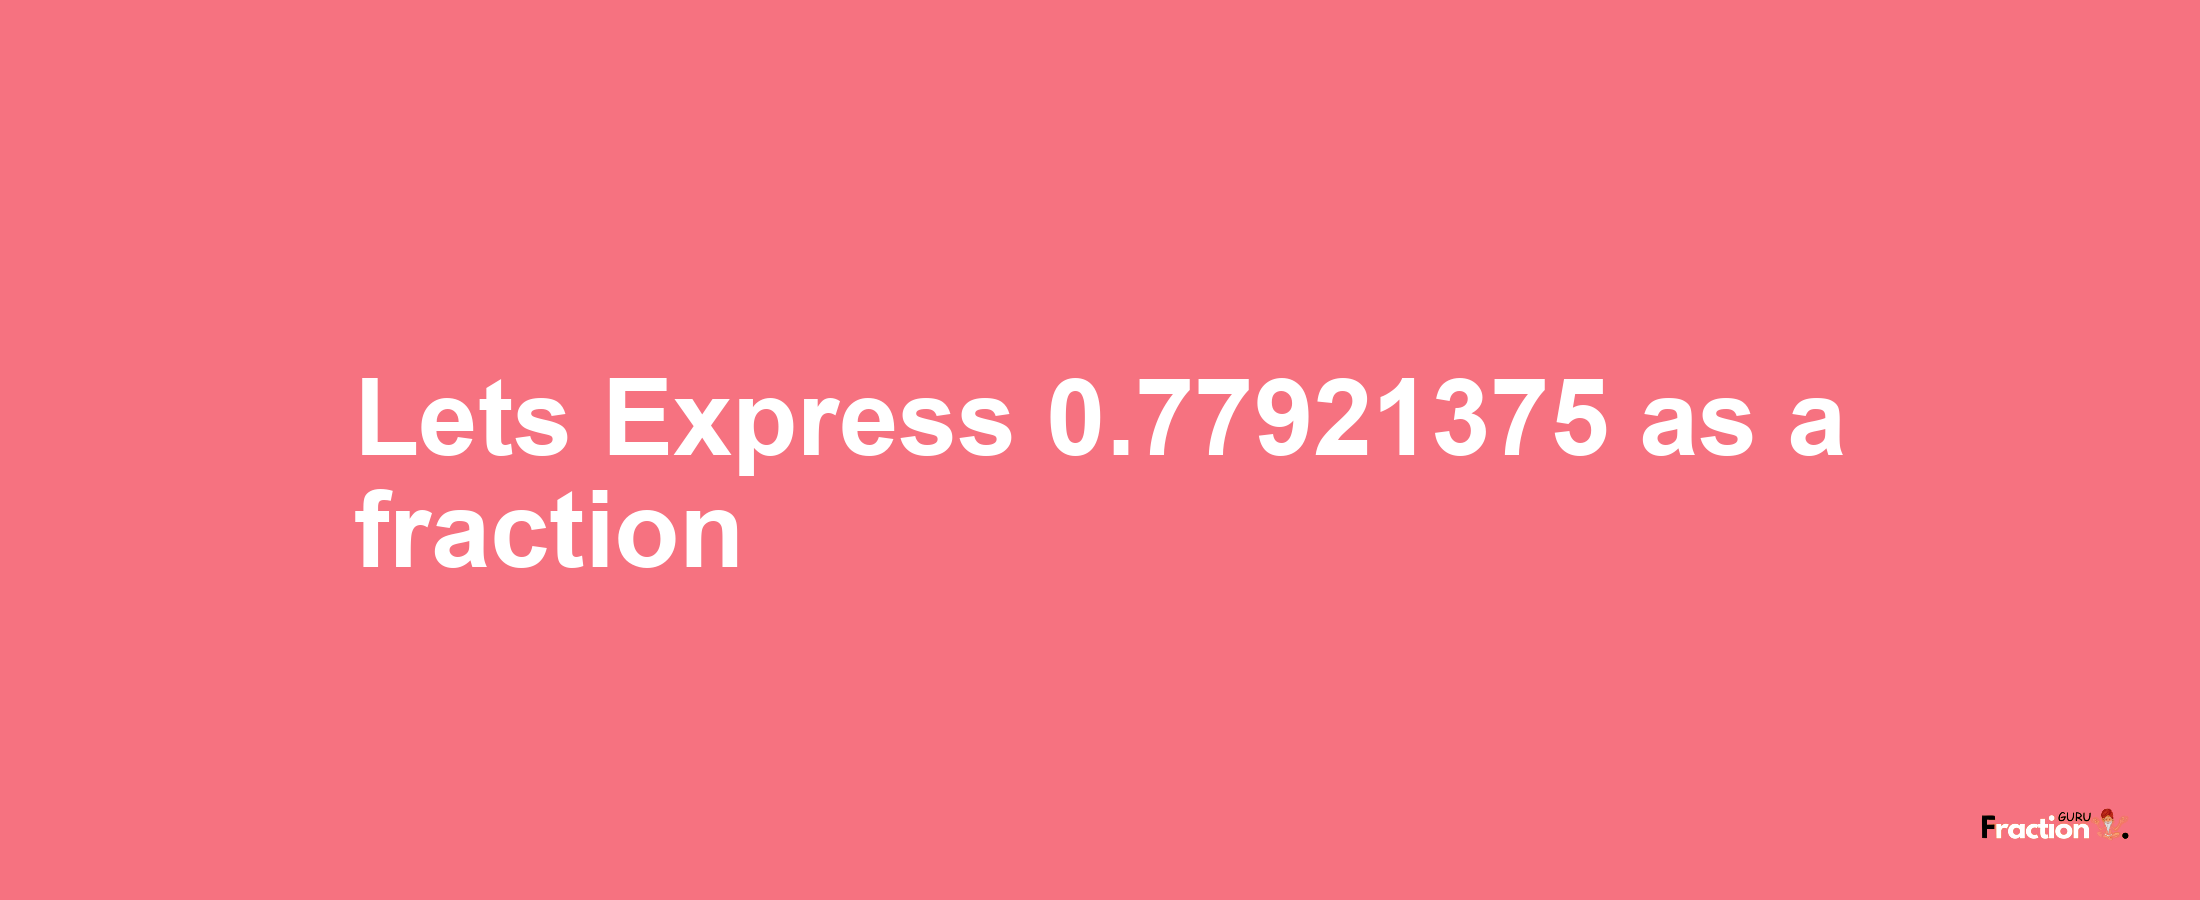 Lets Express 0.77921375 as afraction